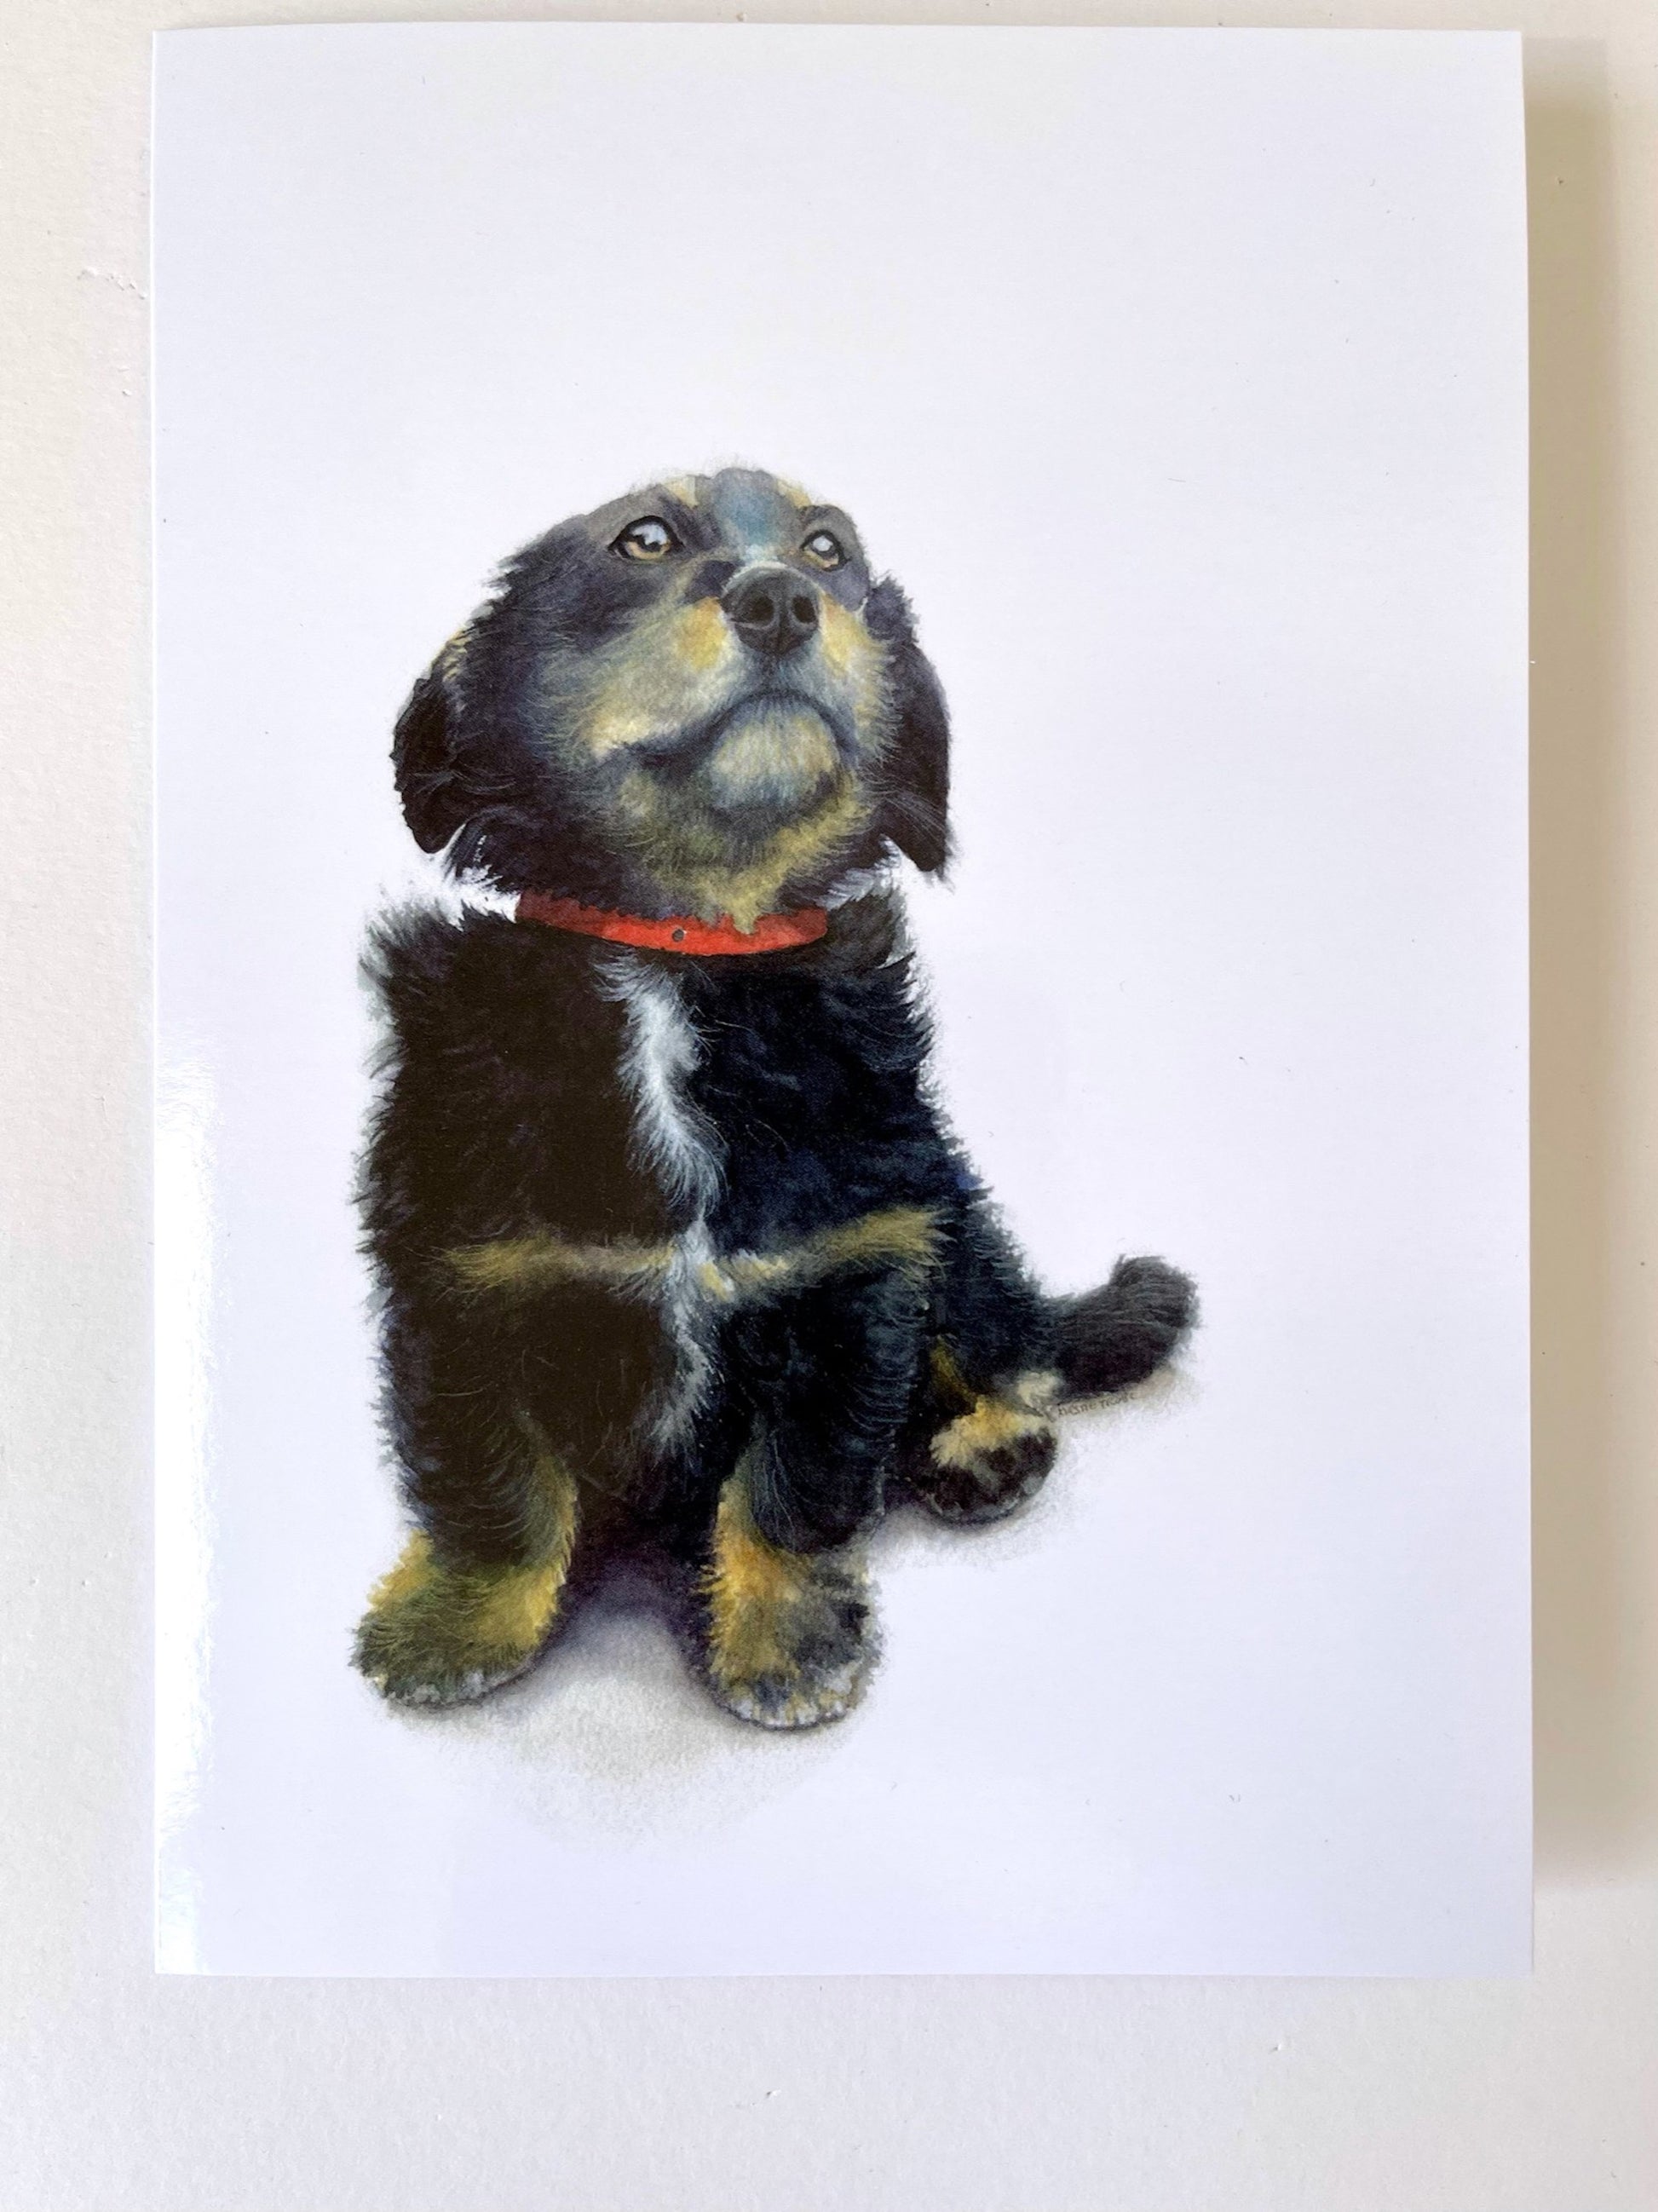 Exhibited at the prestigious Royal Society of British Artists Annual Exhibition at the Mall Galleries in London. A lone puppy sits at the bottom left gazing to the top against a white background. A red collar stands out against its black tufts of fur